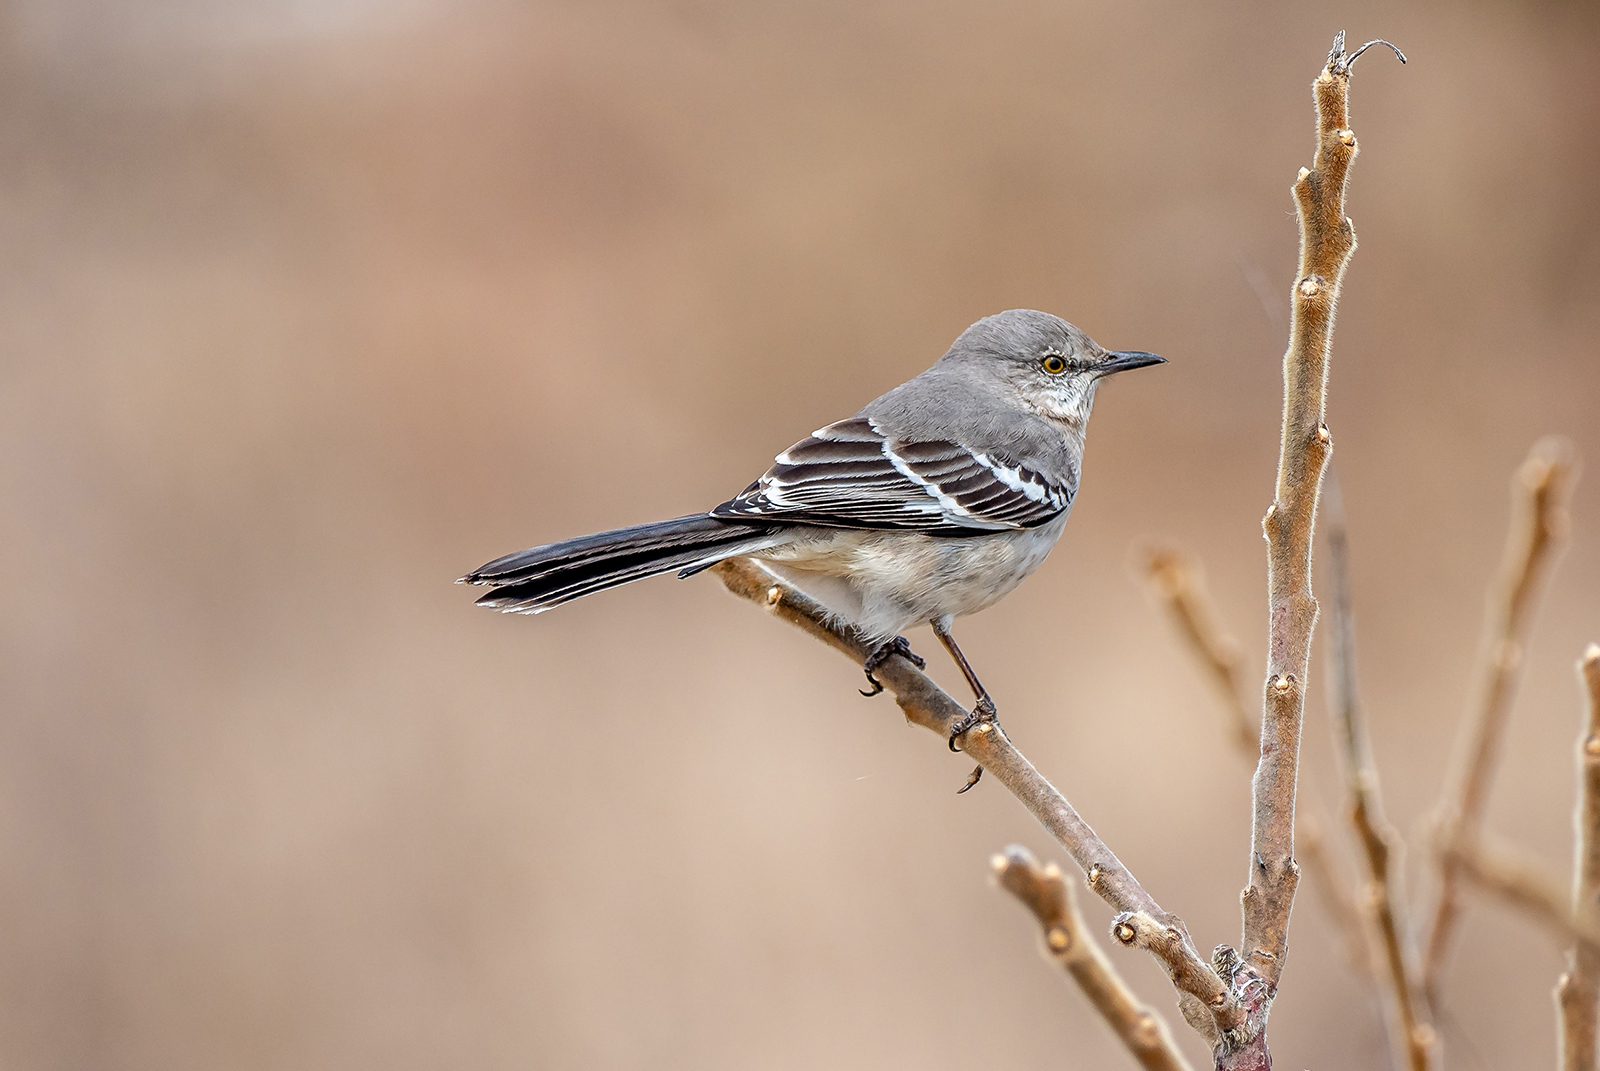 A Northern Mockingbird perches on a branch. Photo by Patrice Bouchard/Unsplash/Creative Commons